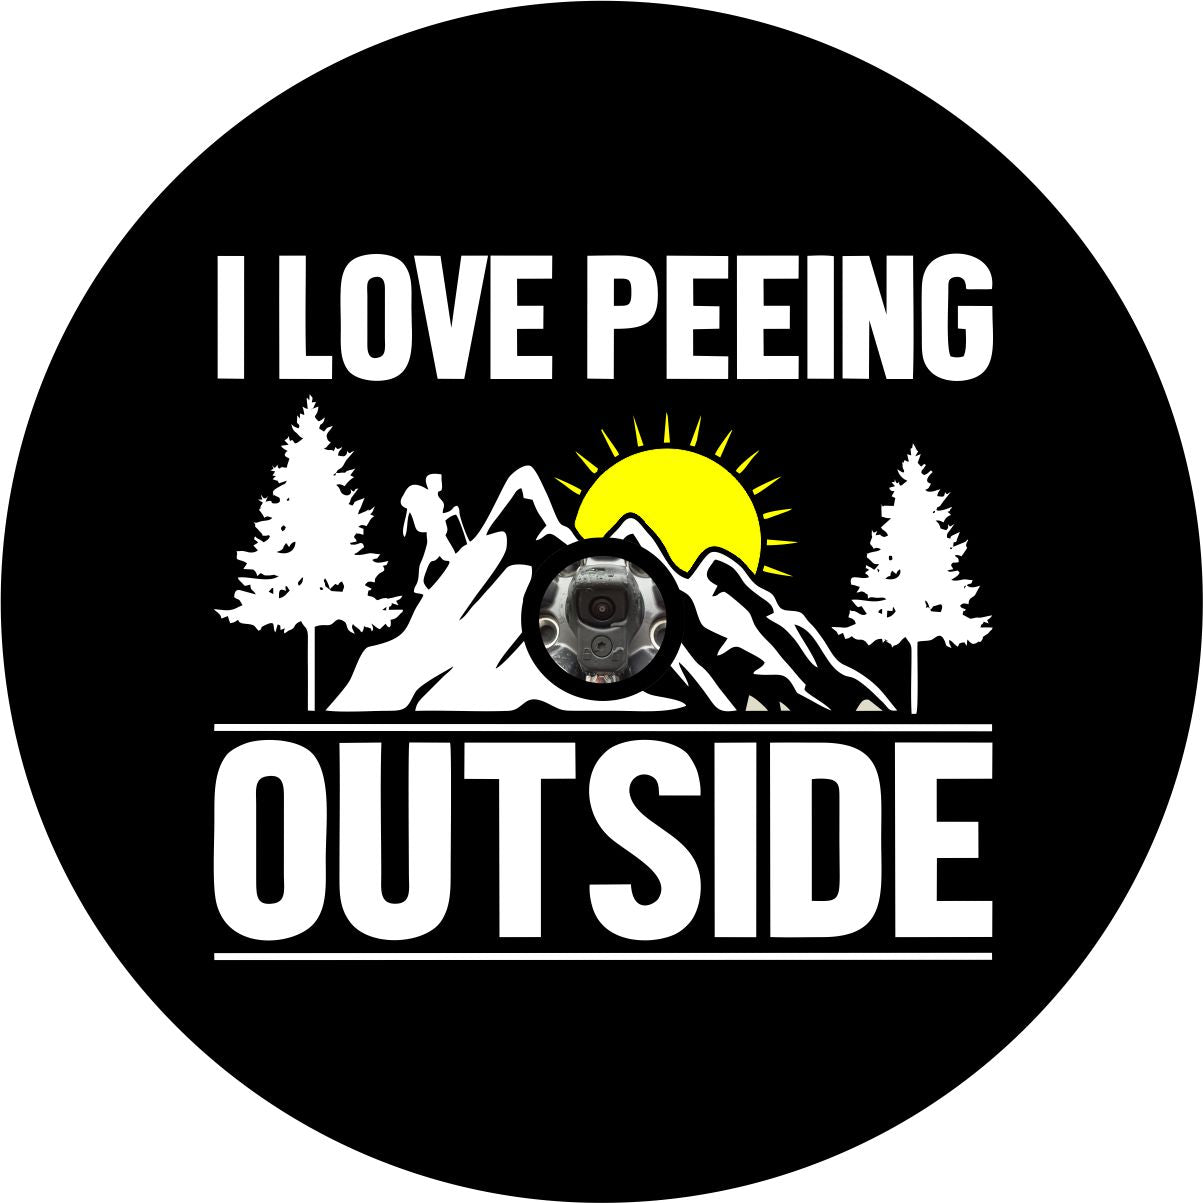 Funny spare tire cover design for wheels with a back up camera. Black vinyl spare tire cover with the silhouette of the mountains and a hiker with the saying I love peeing outside.